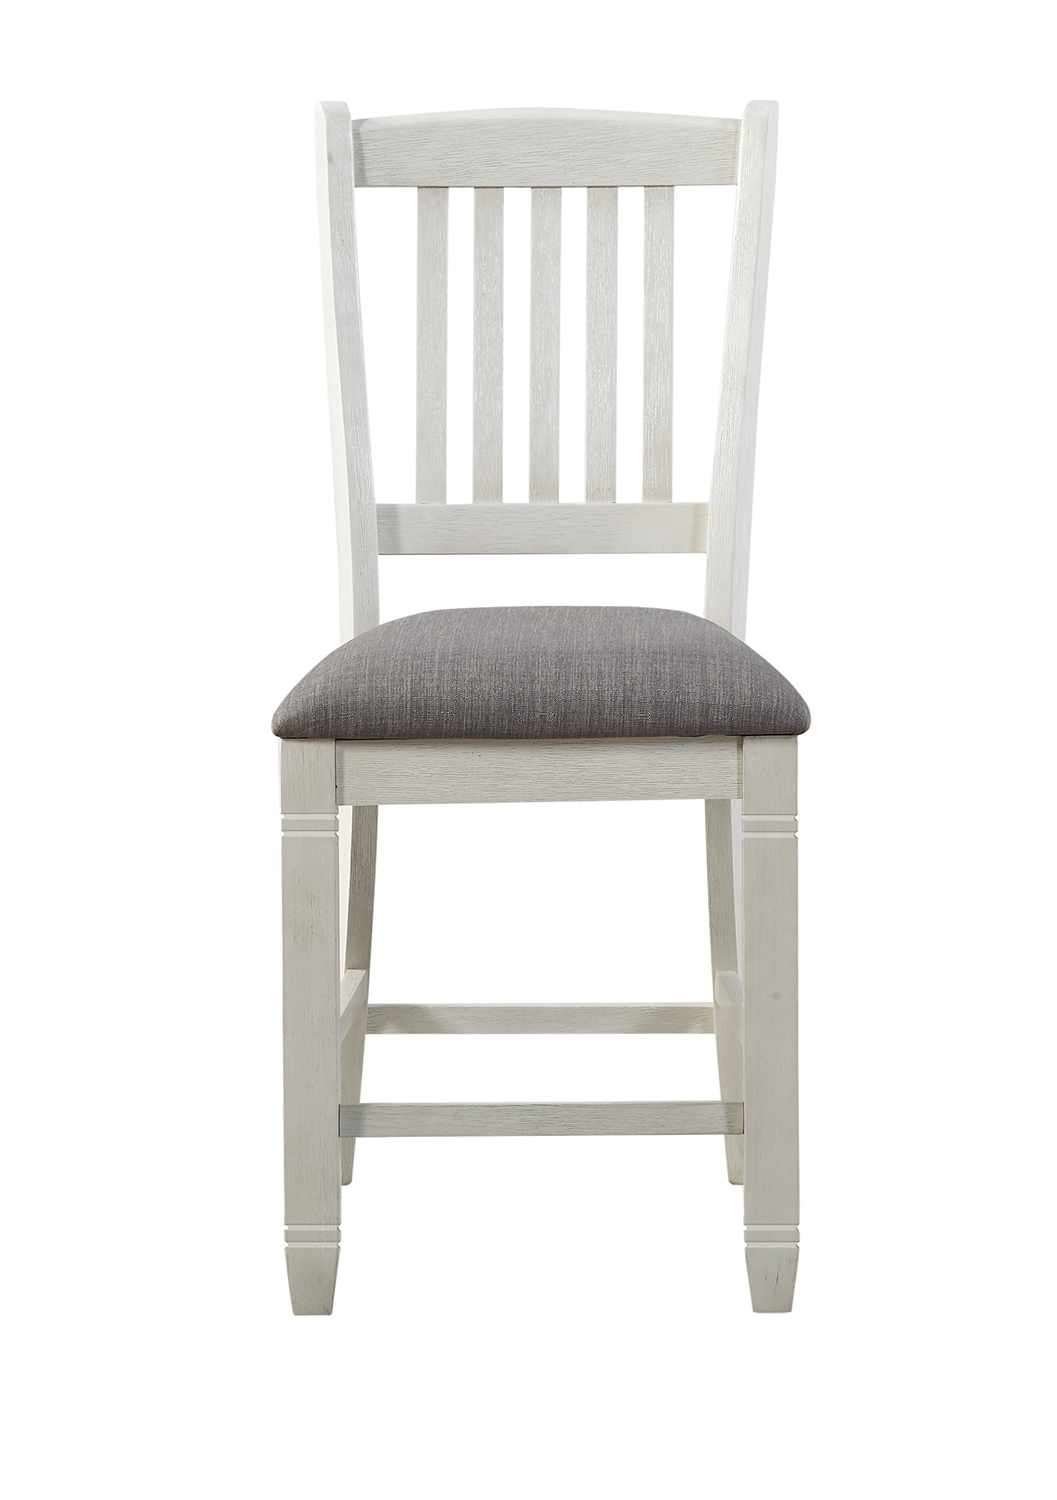 Homelegance Granby Counter Height Chair - Antique White - Rosy Brown